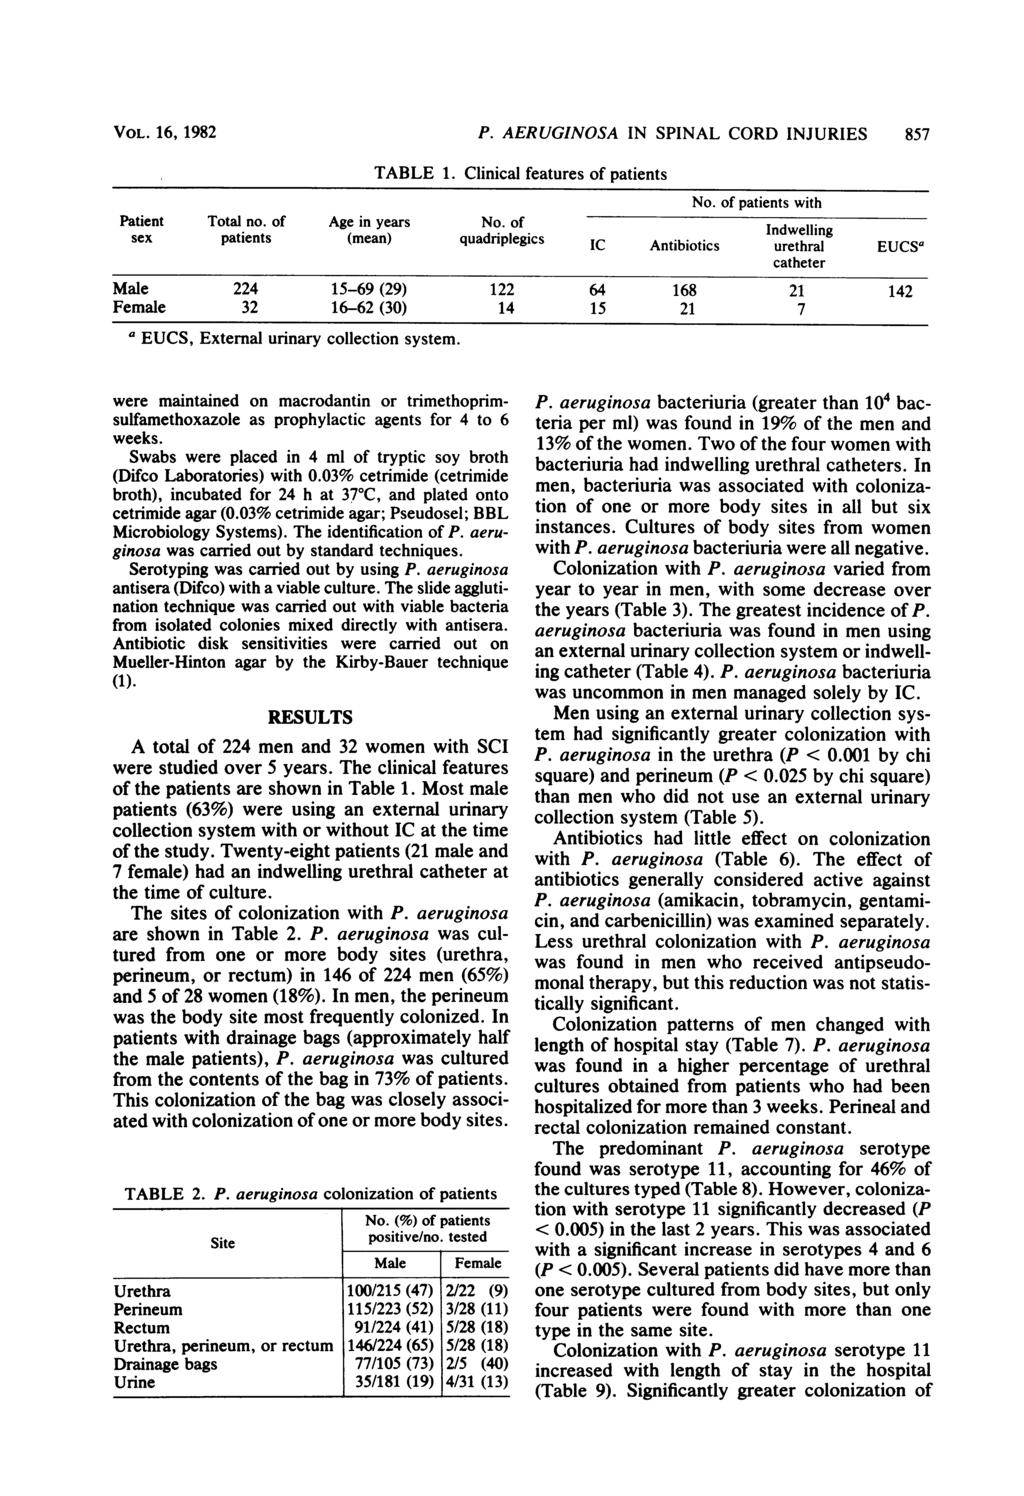 VOL. 16, 1982 P. AERUGINOSA IN SPINAL CORD INJURIES 857 TABLE 1. Clinicl fetures of ptients No. of ptients with Ptient Totl no. of Age in yers No.